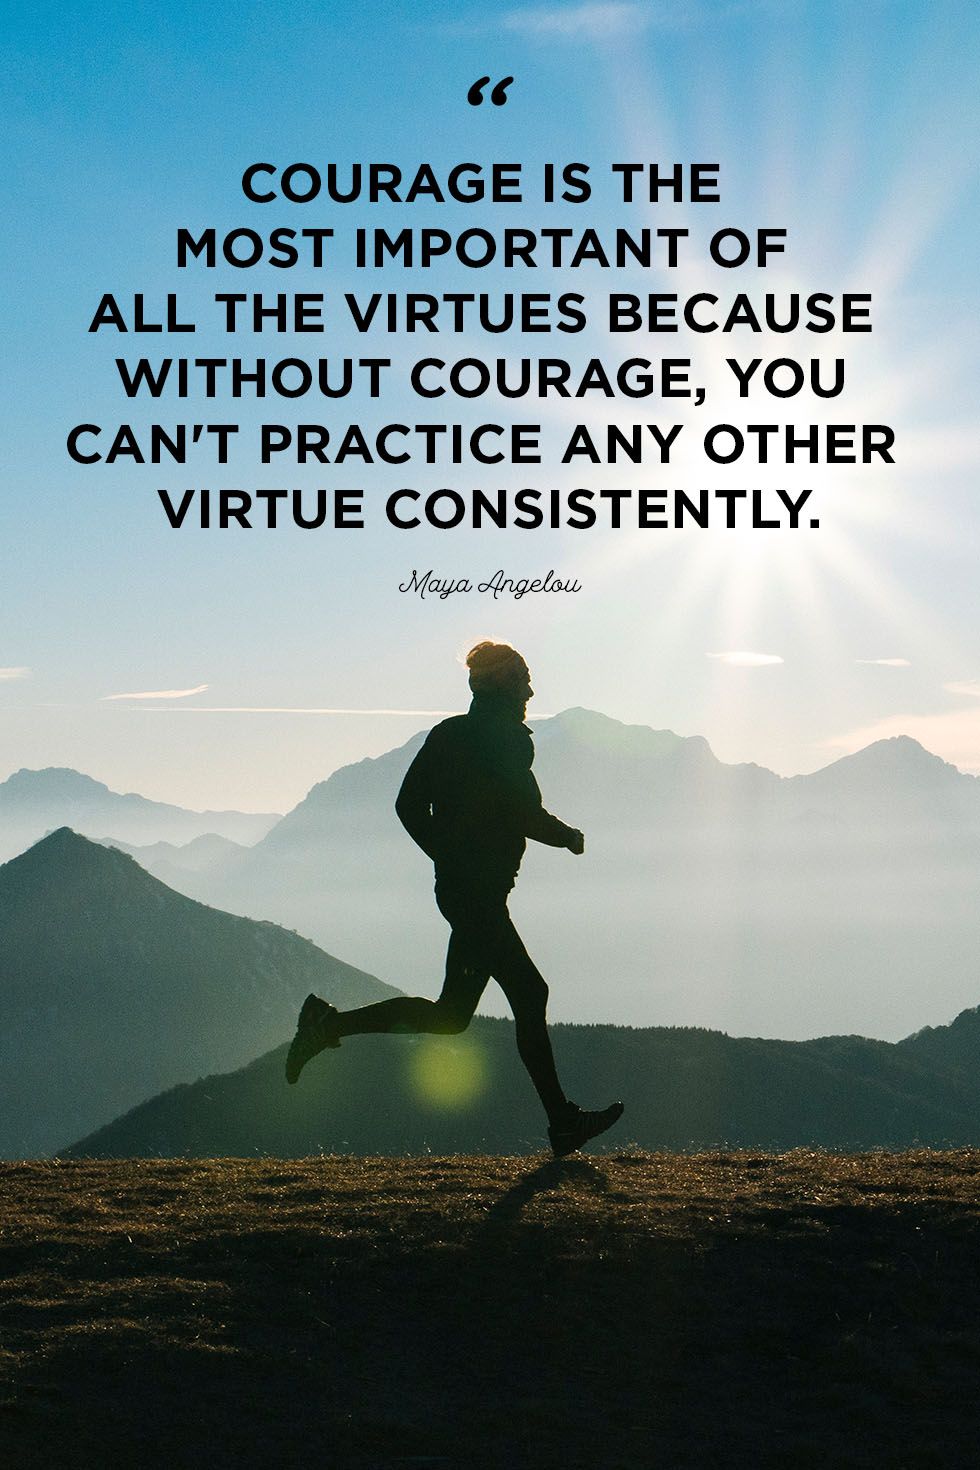 courage is the most important of all the virtues because without courage you can’t practice any other virtue consistently